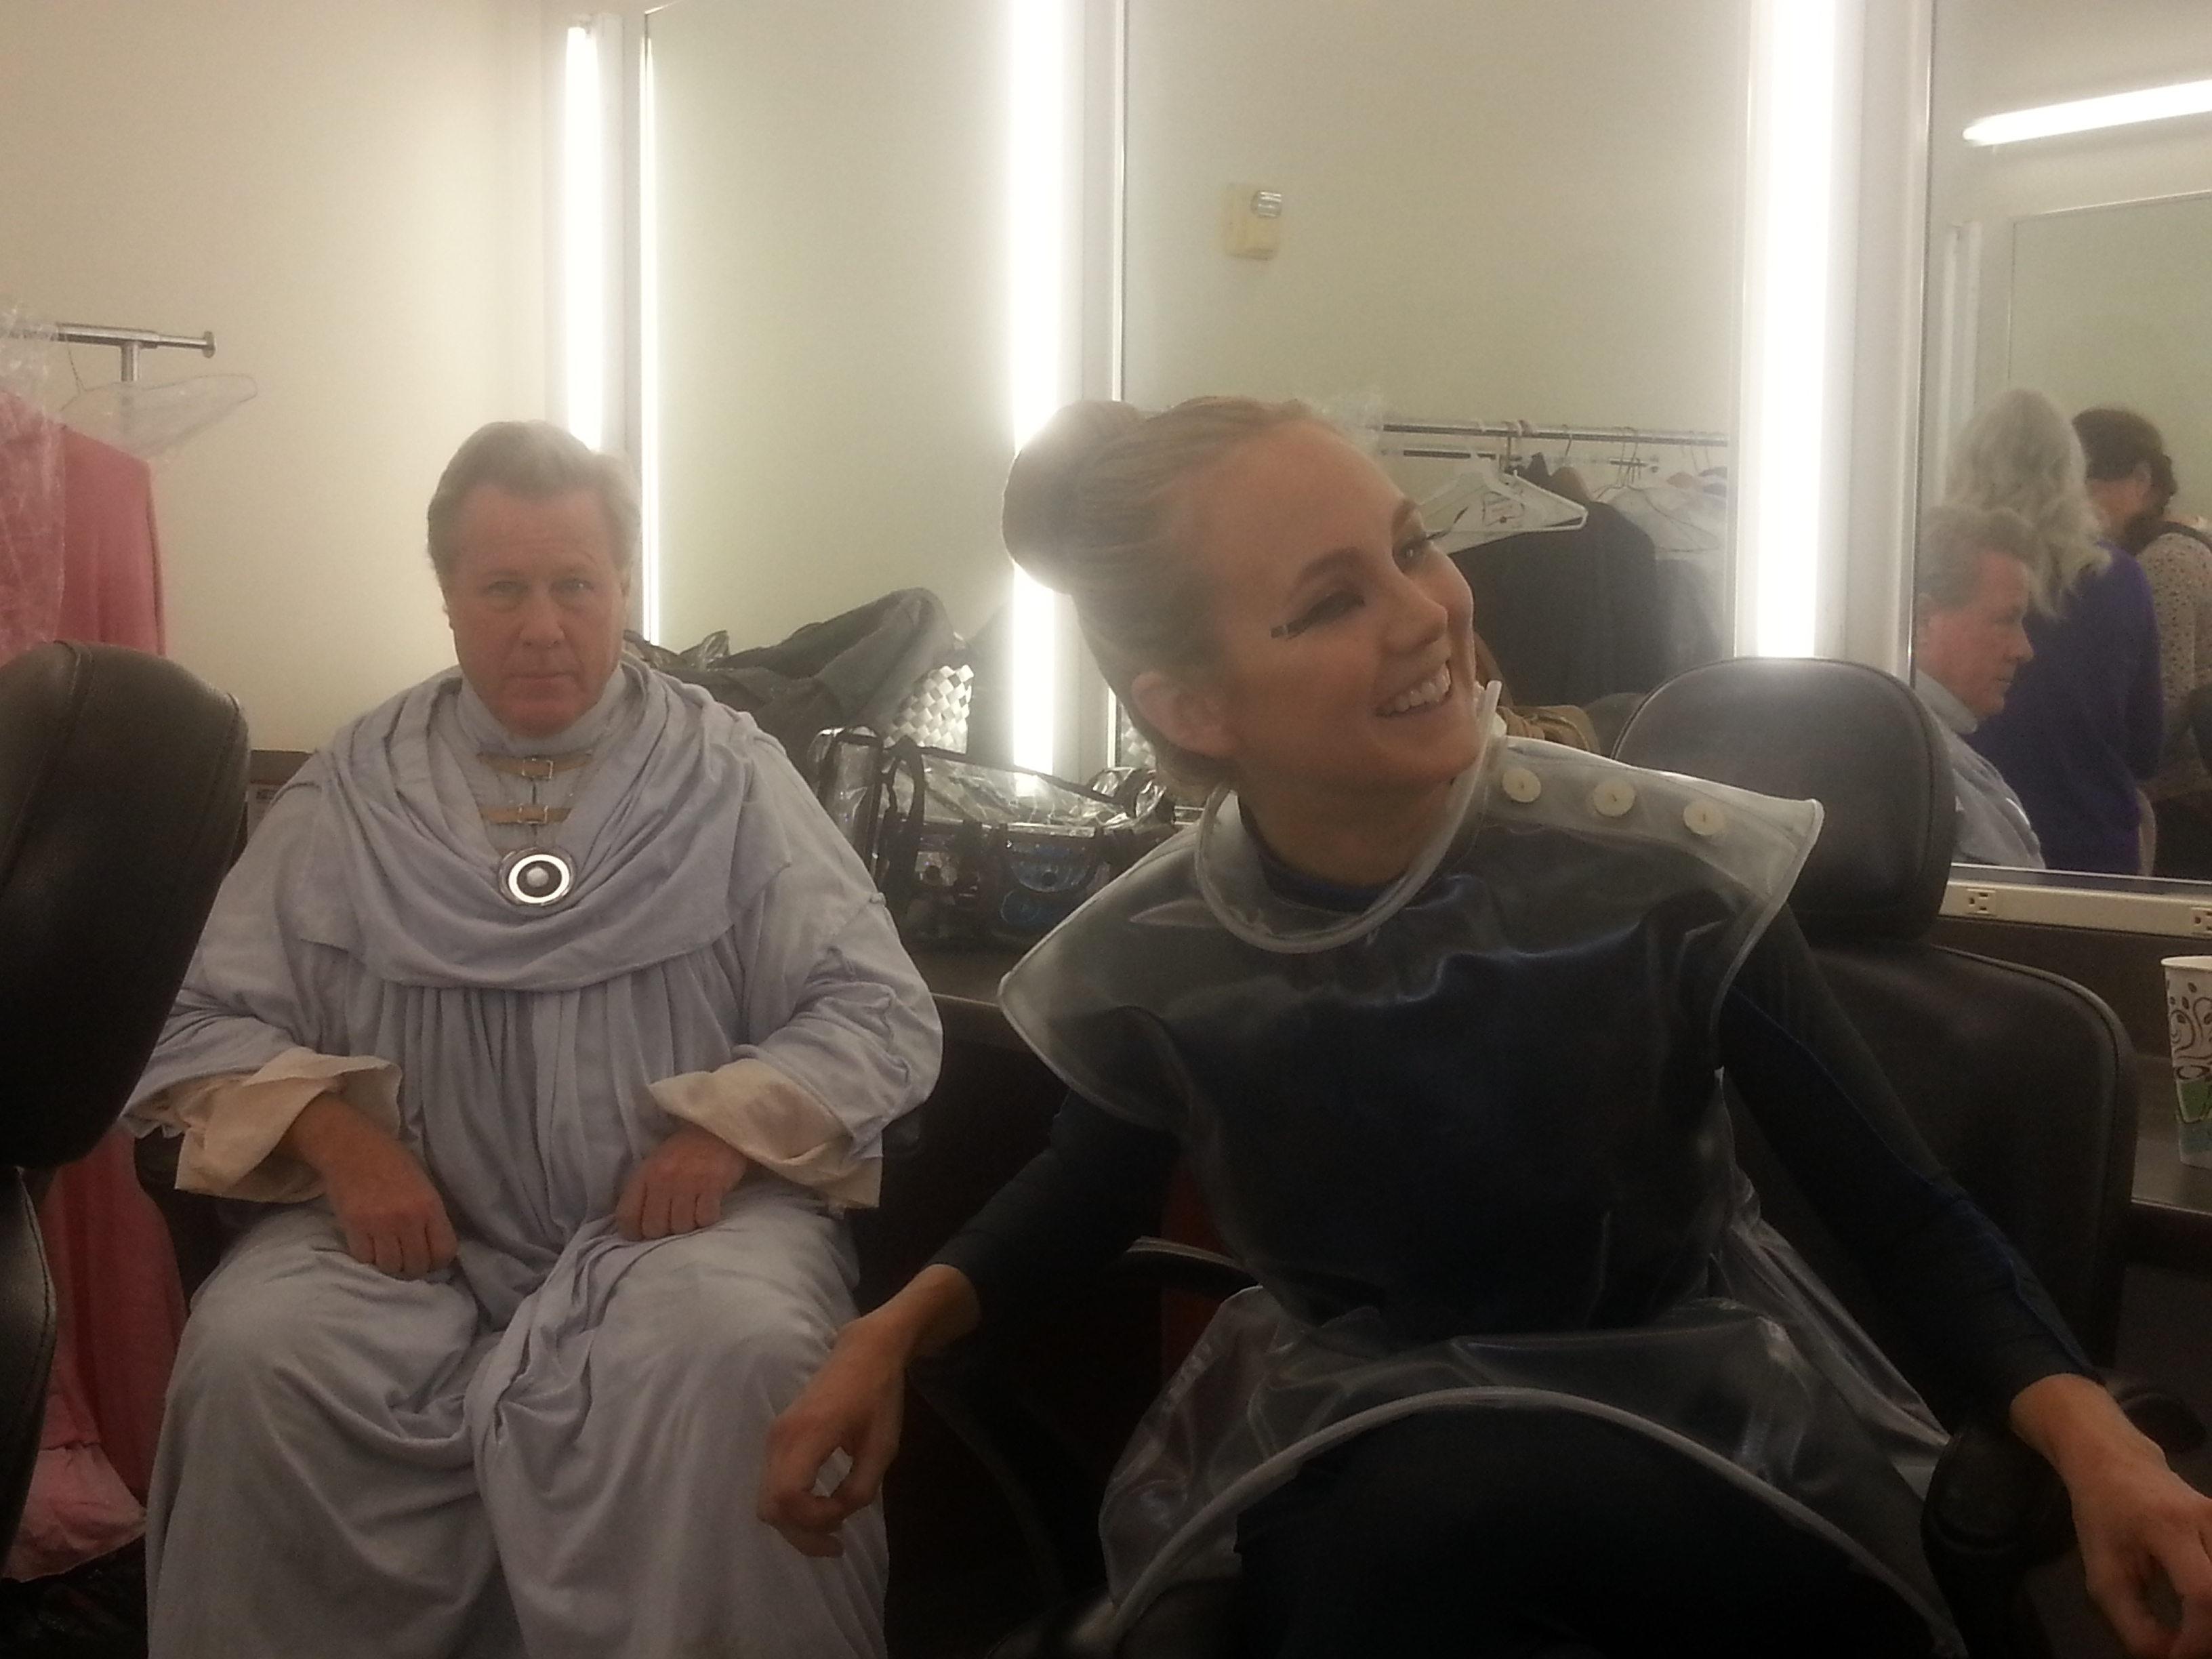 Katherine with John Heard. On the set for One More Day.